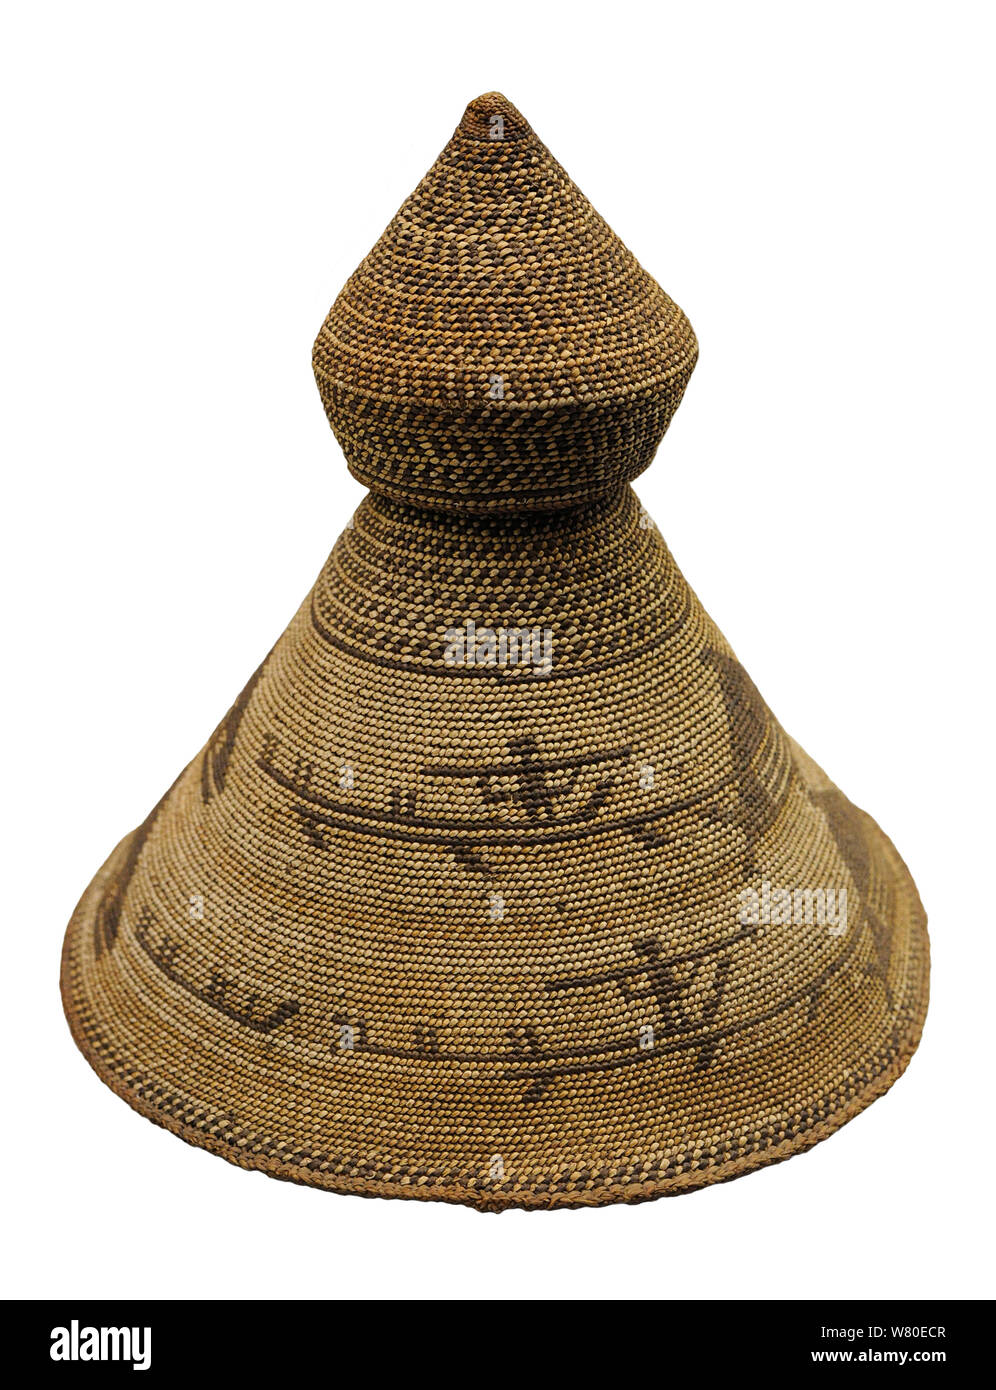 Nuu-chah-nulth (Nutka) culture. Indigenous peoples of the Pacific Northwest Coast in Canada. Hat made of vegetable fiber. Last third of the 18th century. Vancouver Island, Canada. Museum of the Americas. Madrid, Spain. Stock Photo